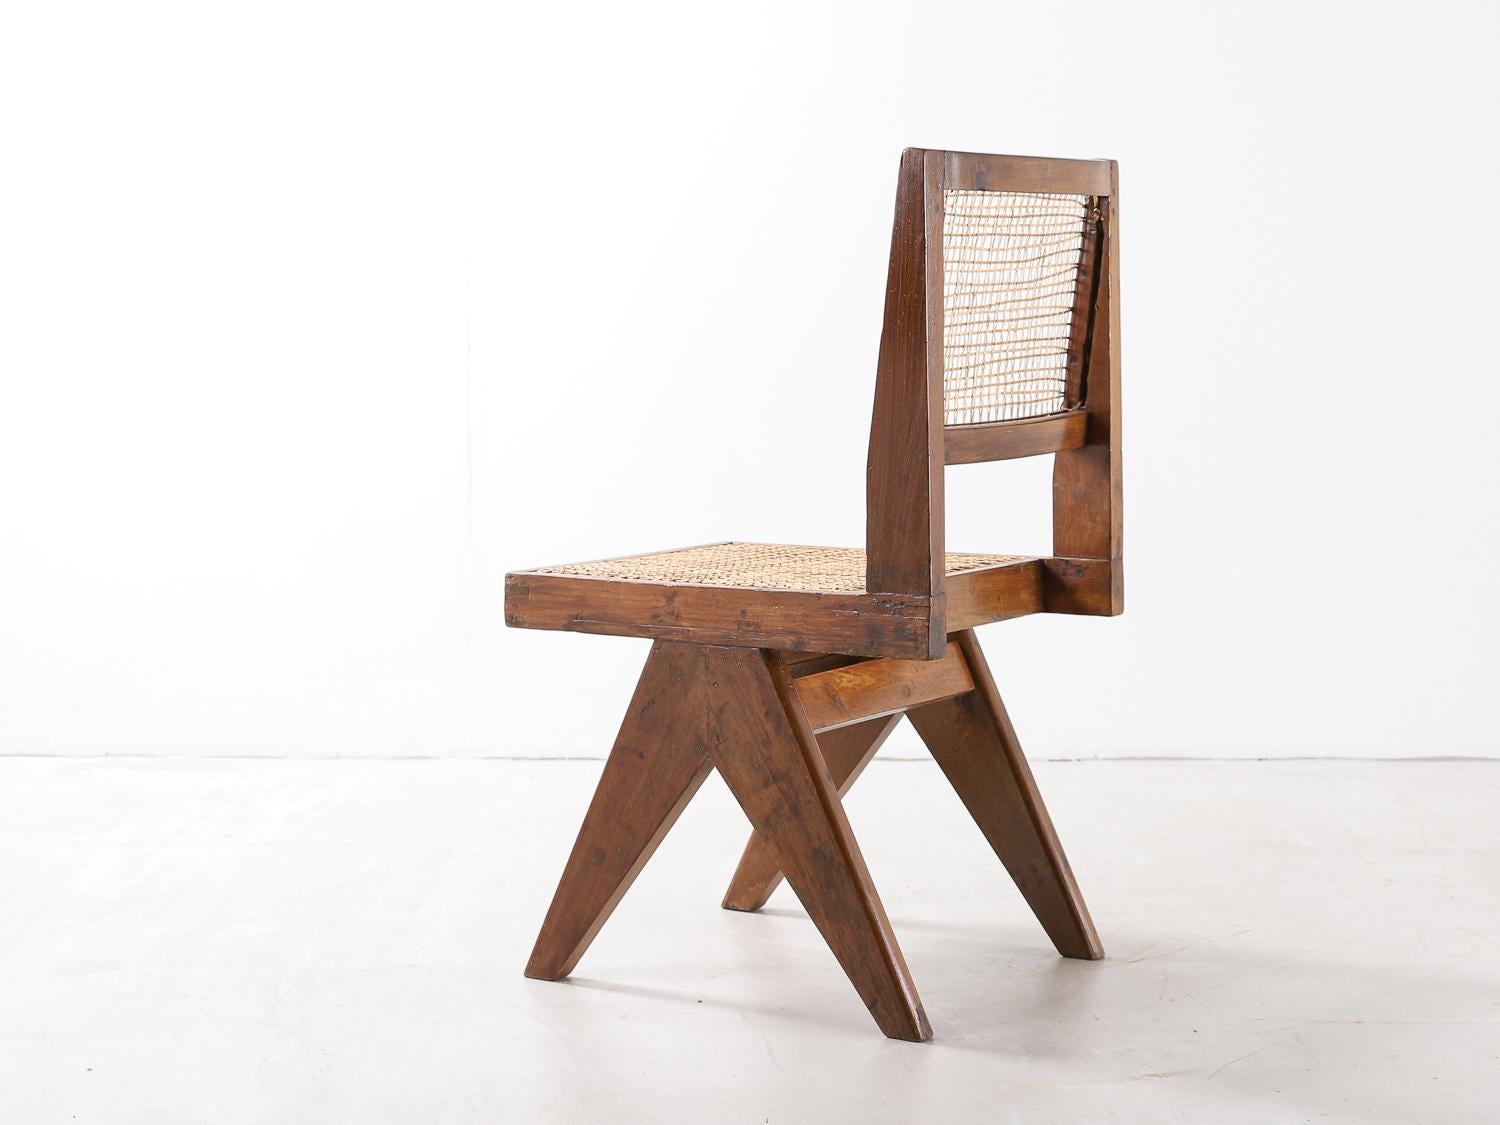 Indian Pierre Jeanneret Chair, circa 1958-1959